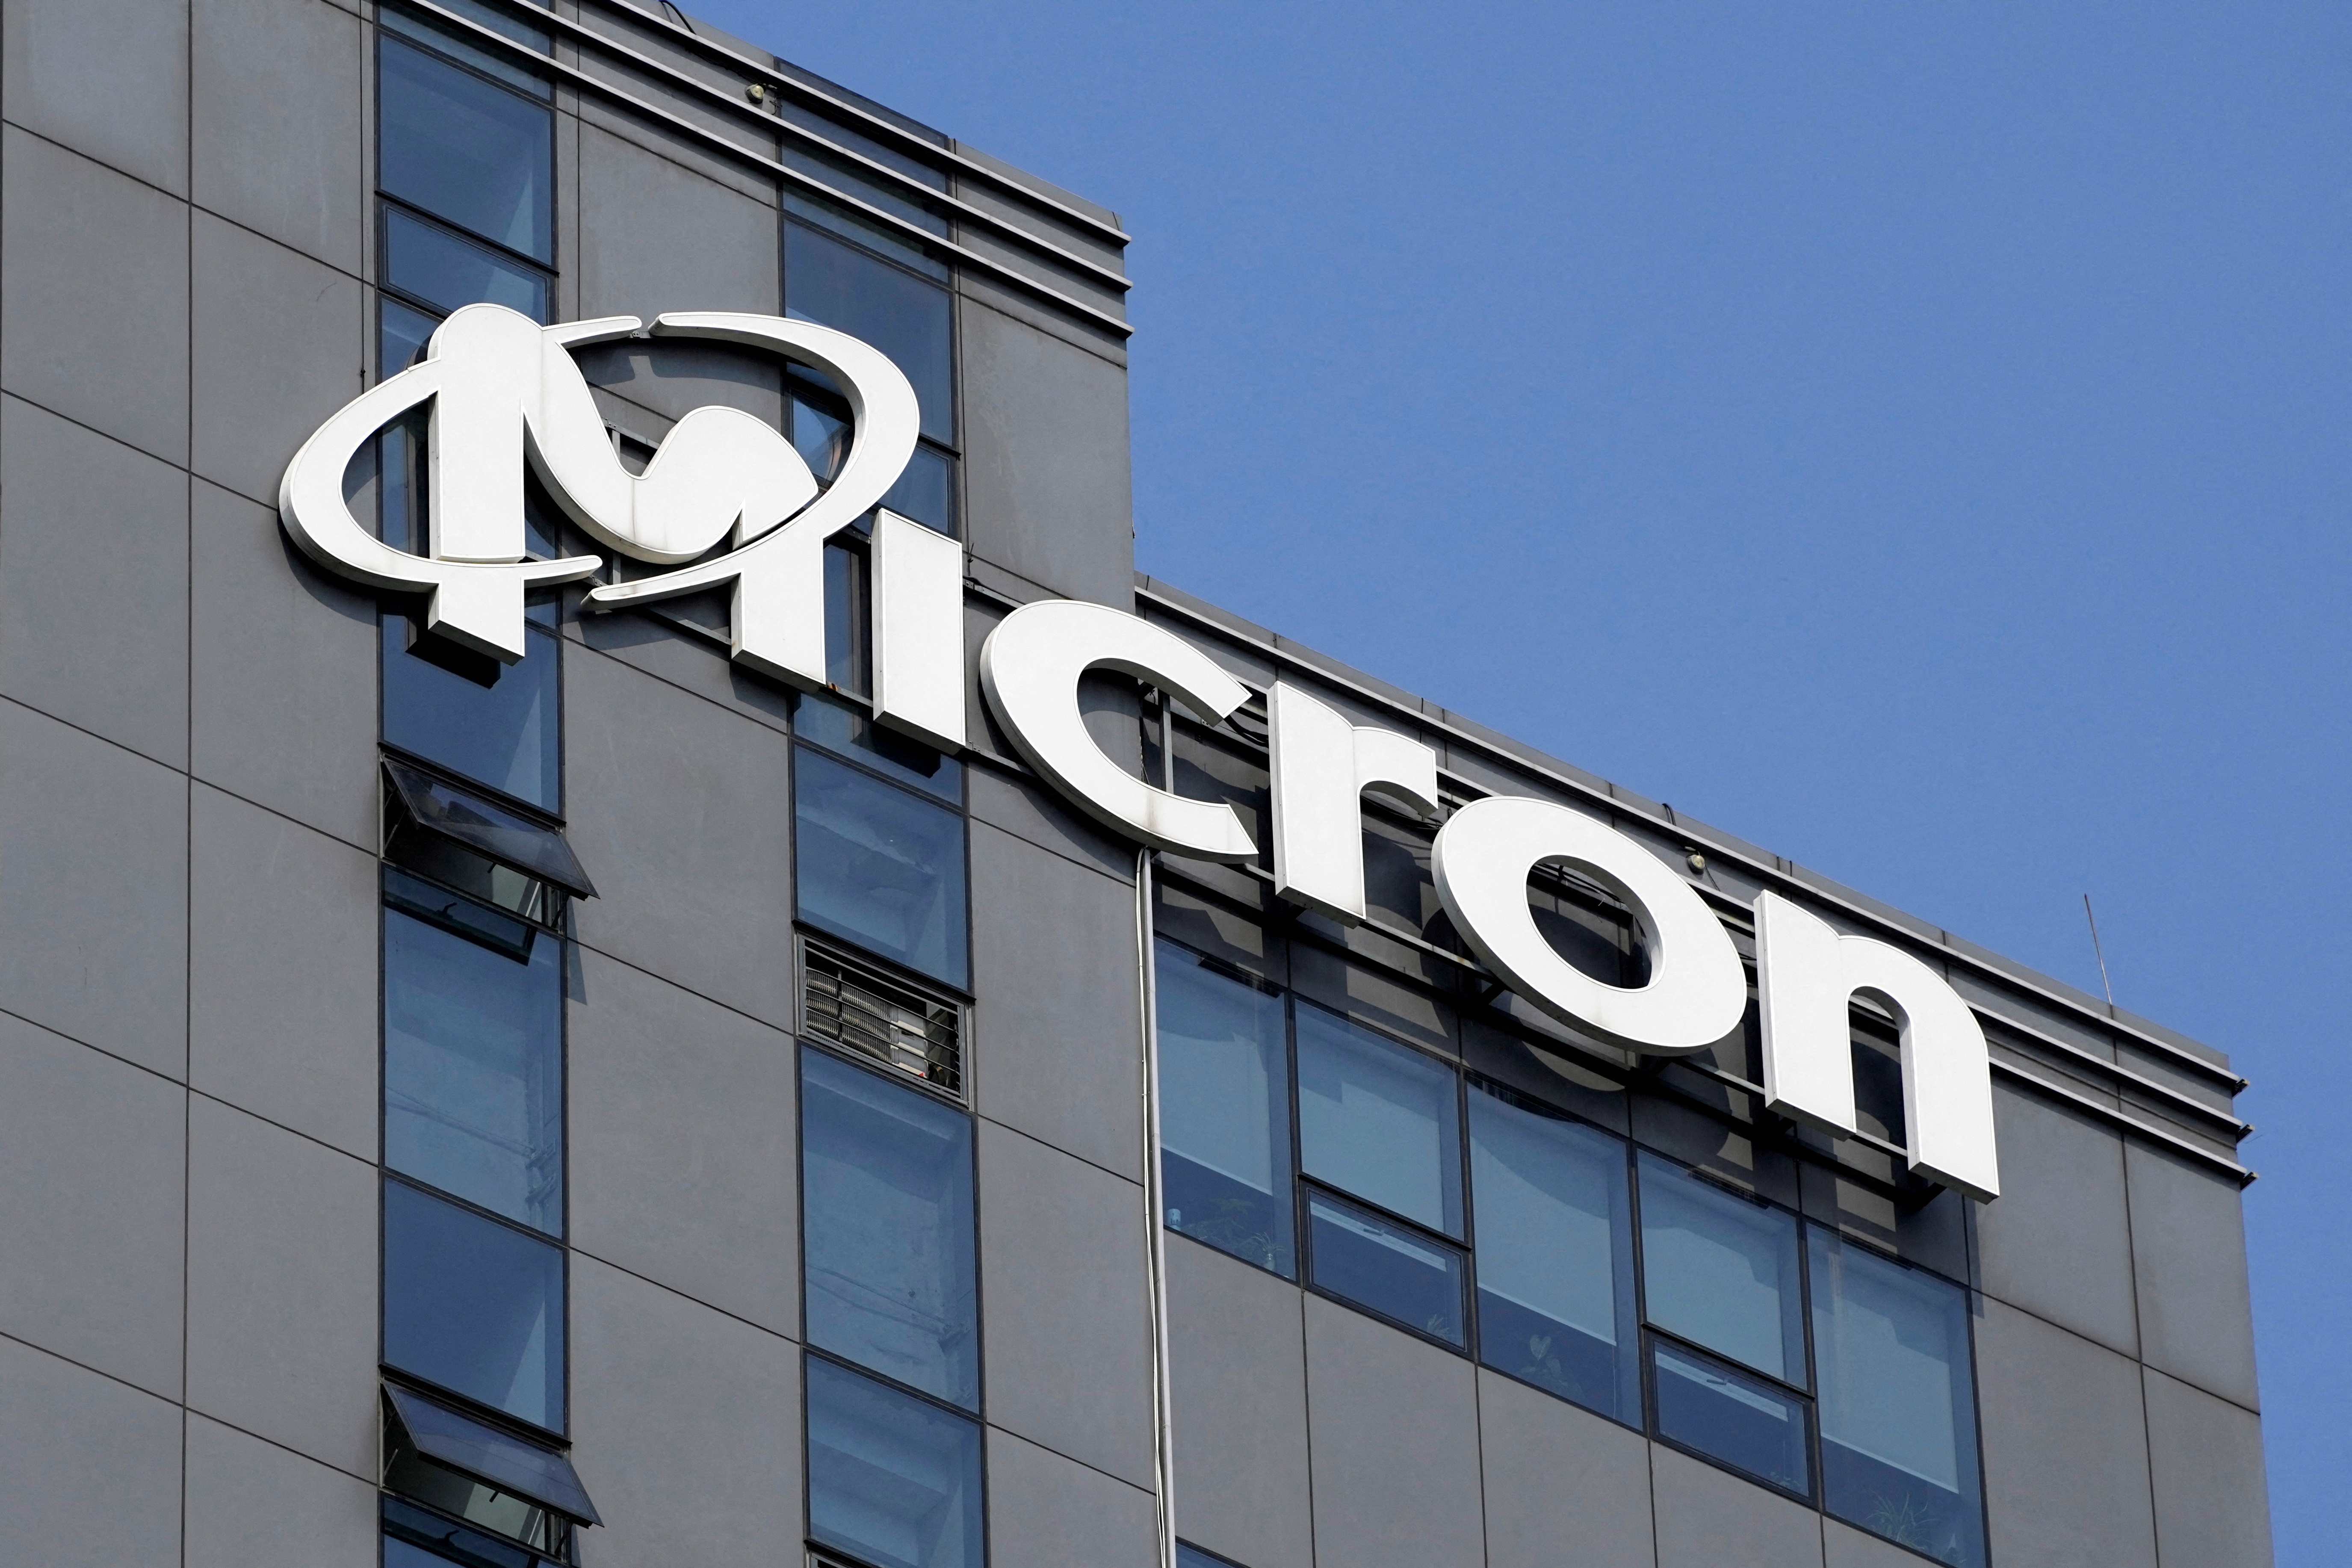 The company logo is seen on the Micron Technology Inc. offices in Shanghai